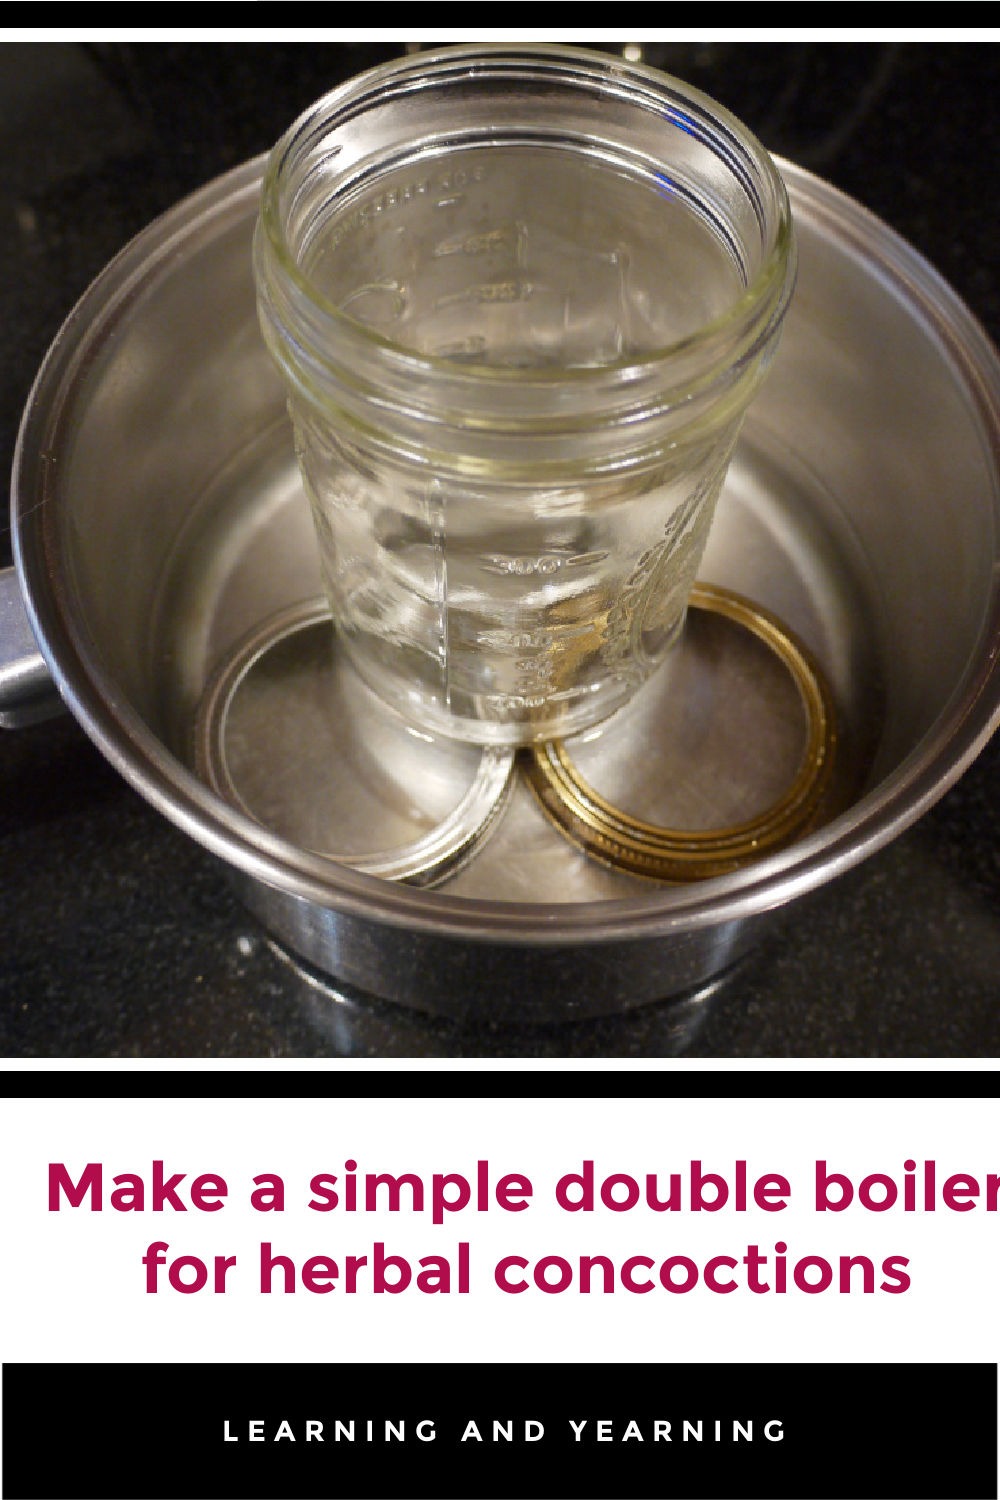 How to Make a Double Boiler for Herbal Concoctions